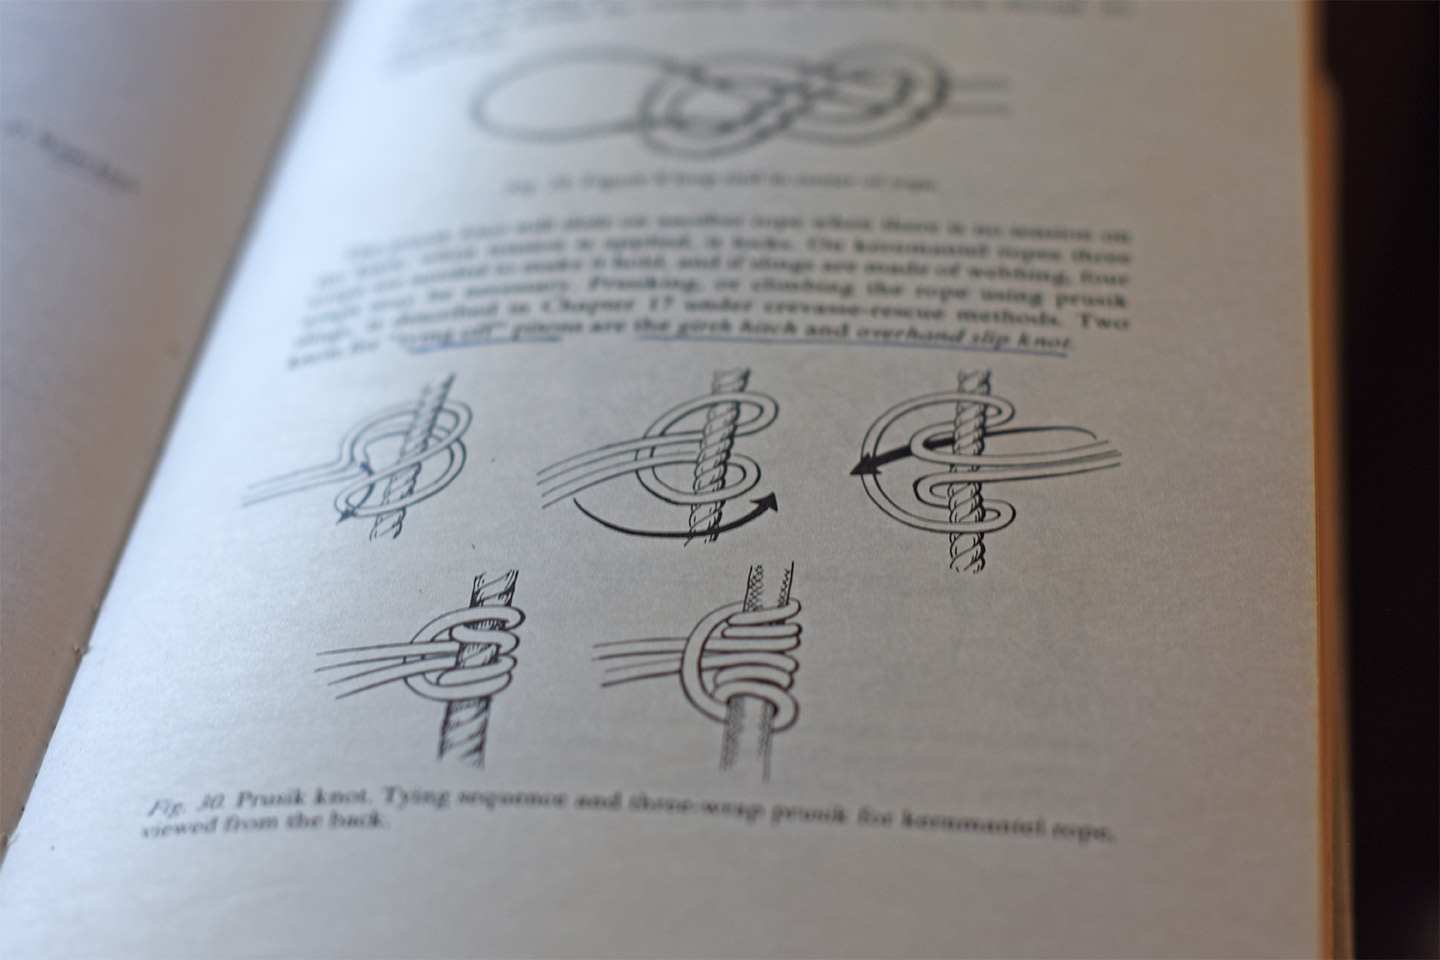 Page of book showing how to tie a prusik knot, which is a girth hitch repeated three times